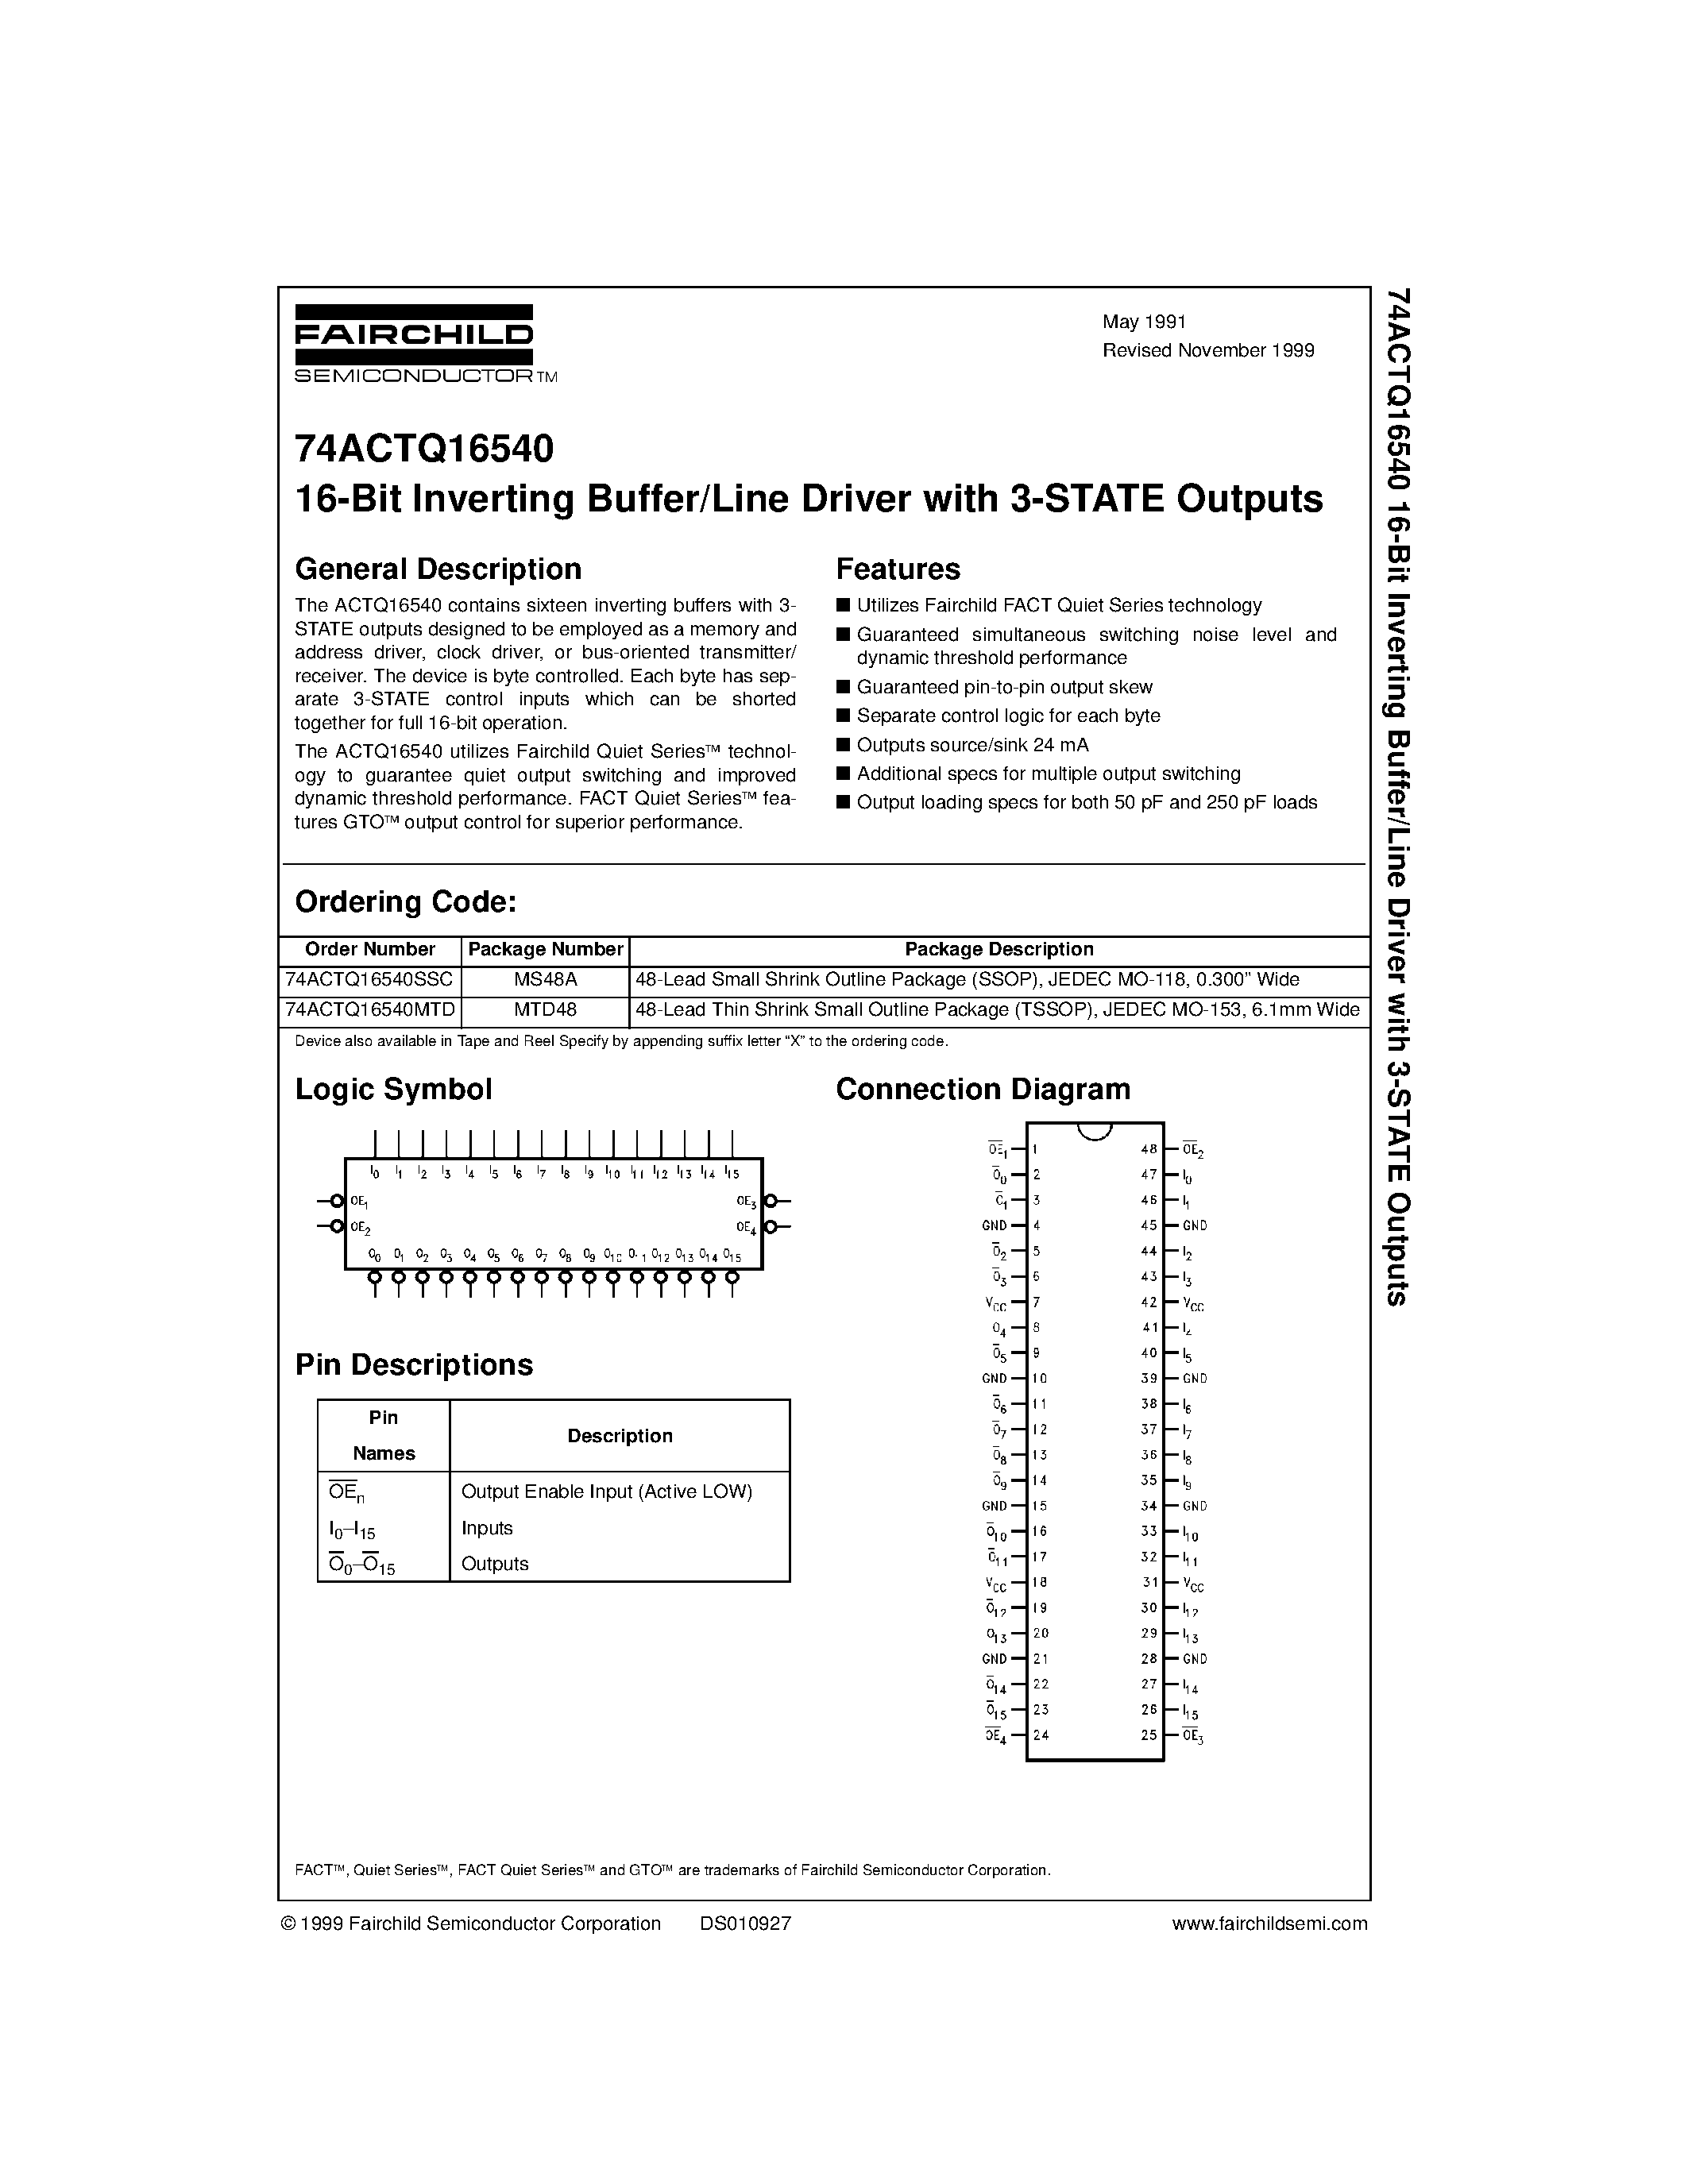 Datasheet 74ACTQ16540MTD - 16-Bit Inverting Buffer/Line Driver with 3-STATE Outputs page 1